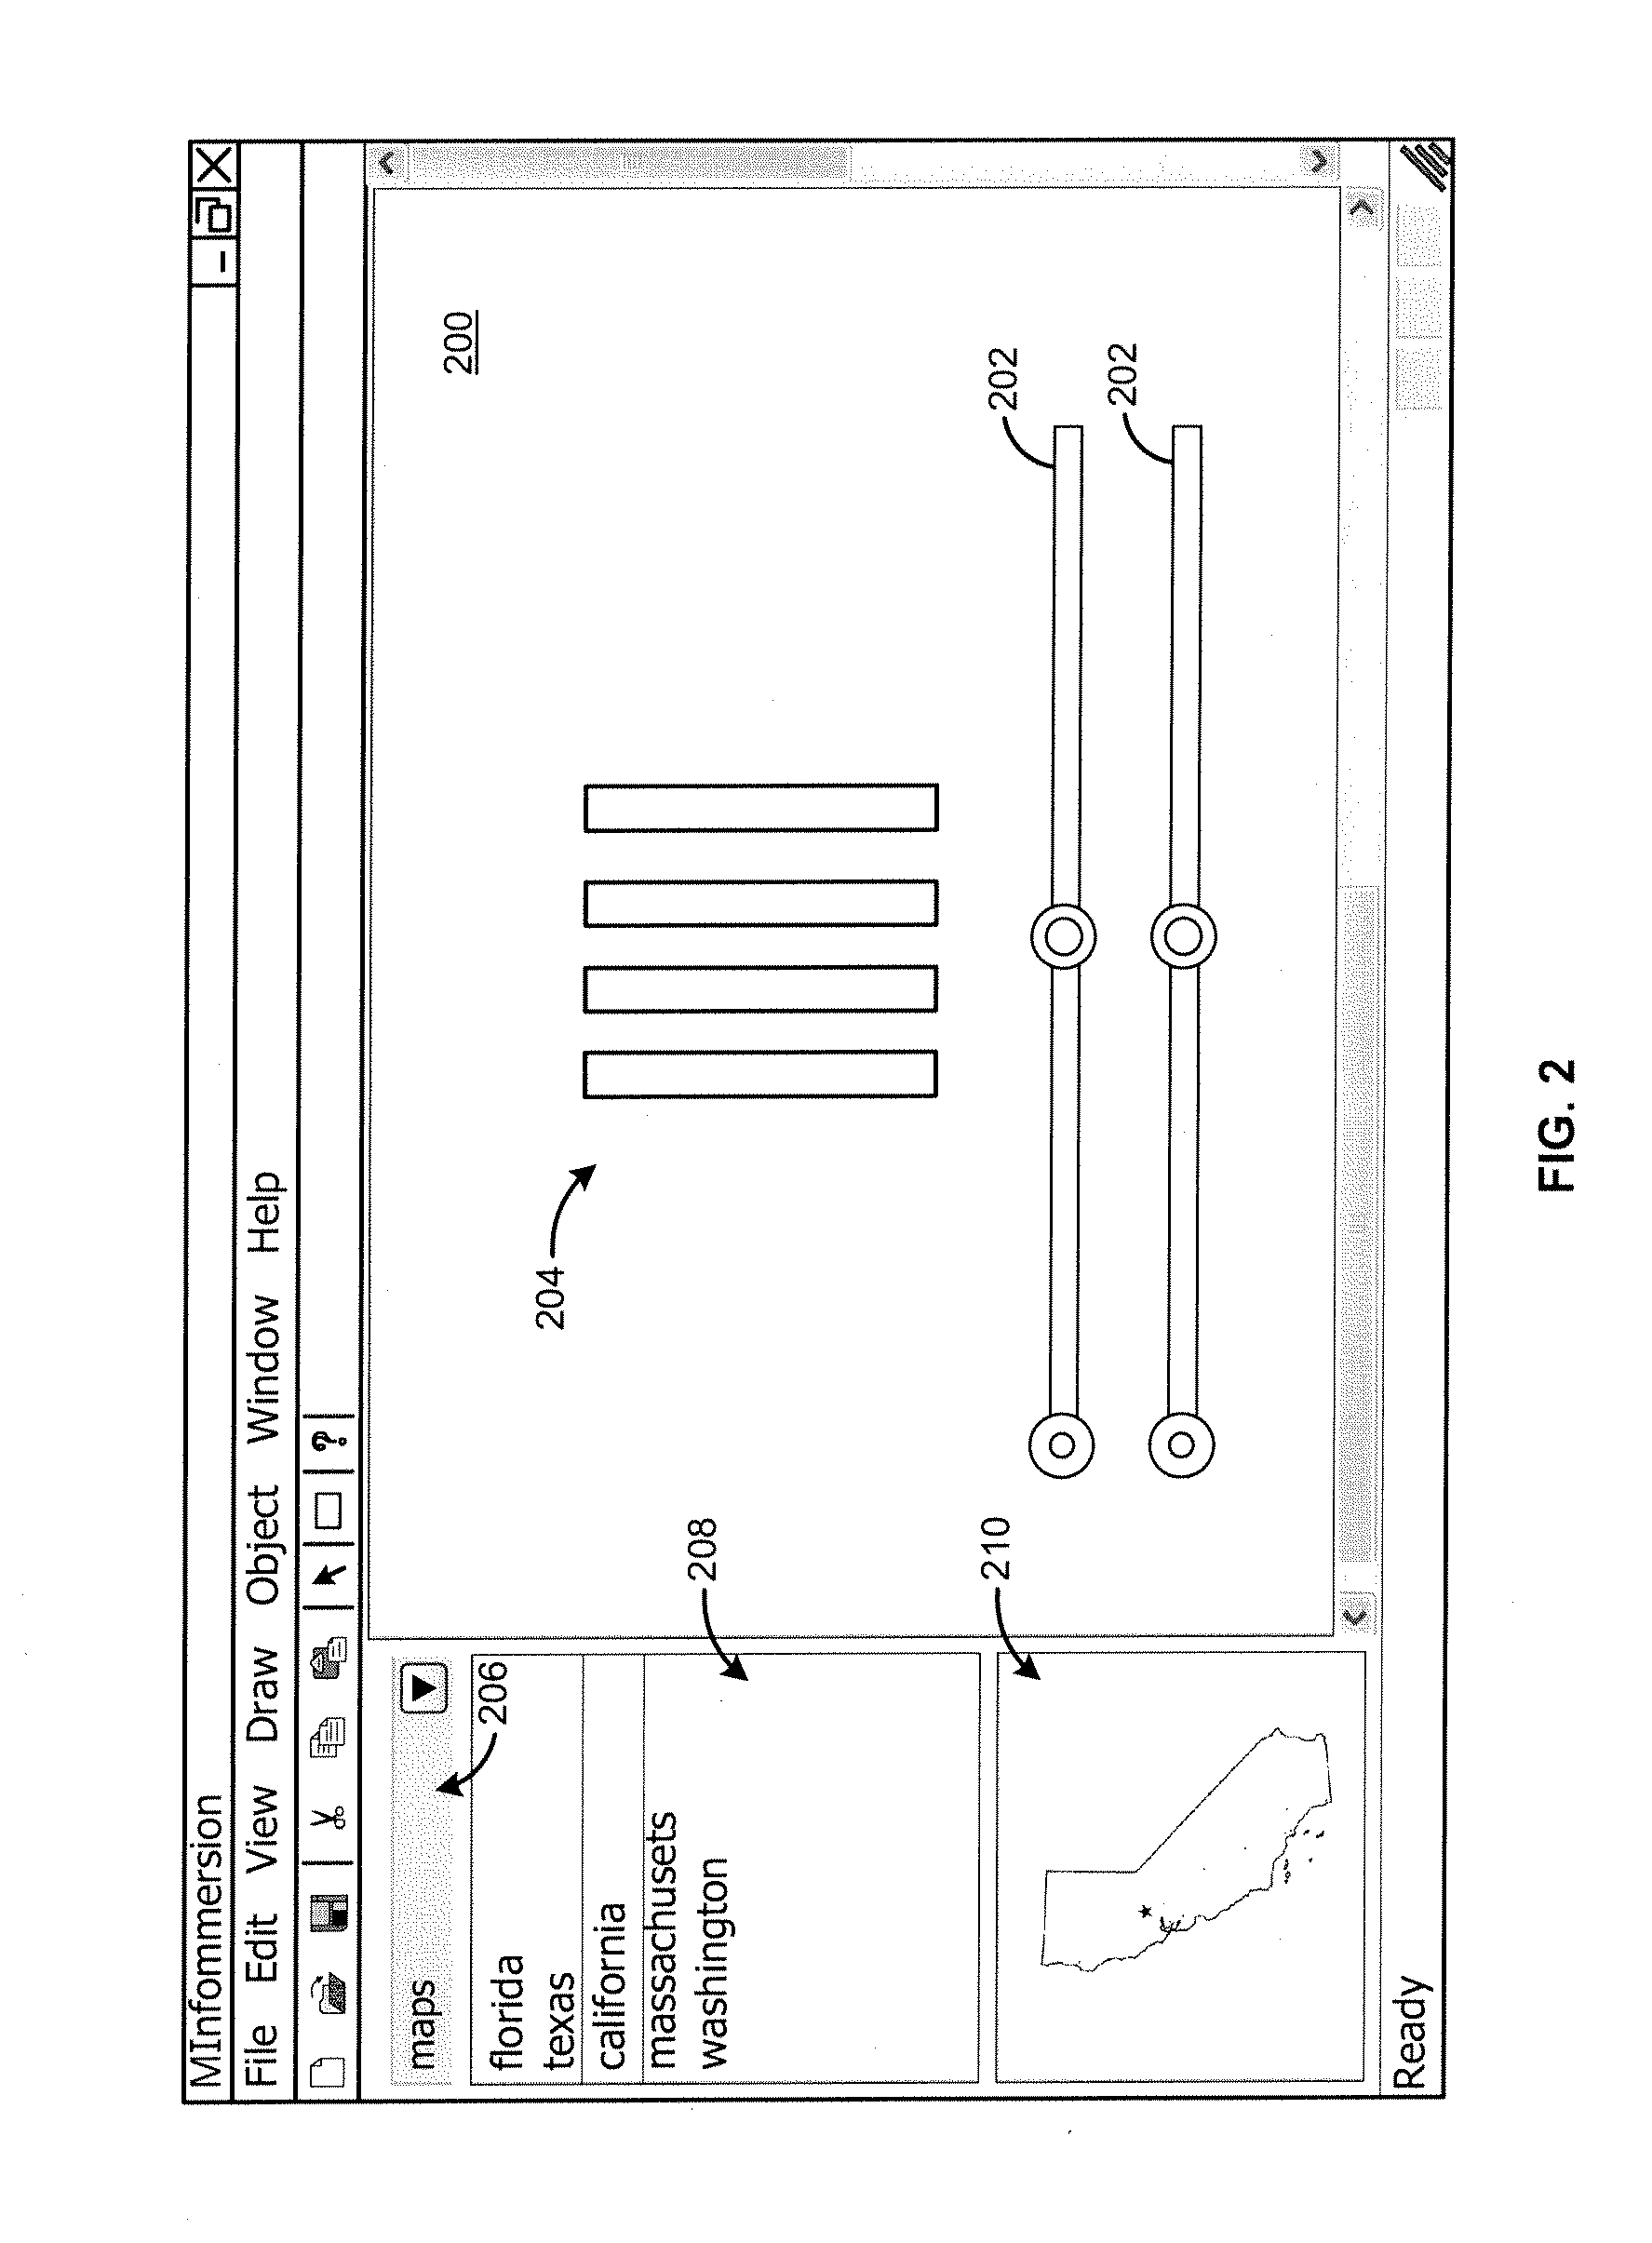 Method and System for Creating Graphical and Interactive Representations of Input and Output Data